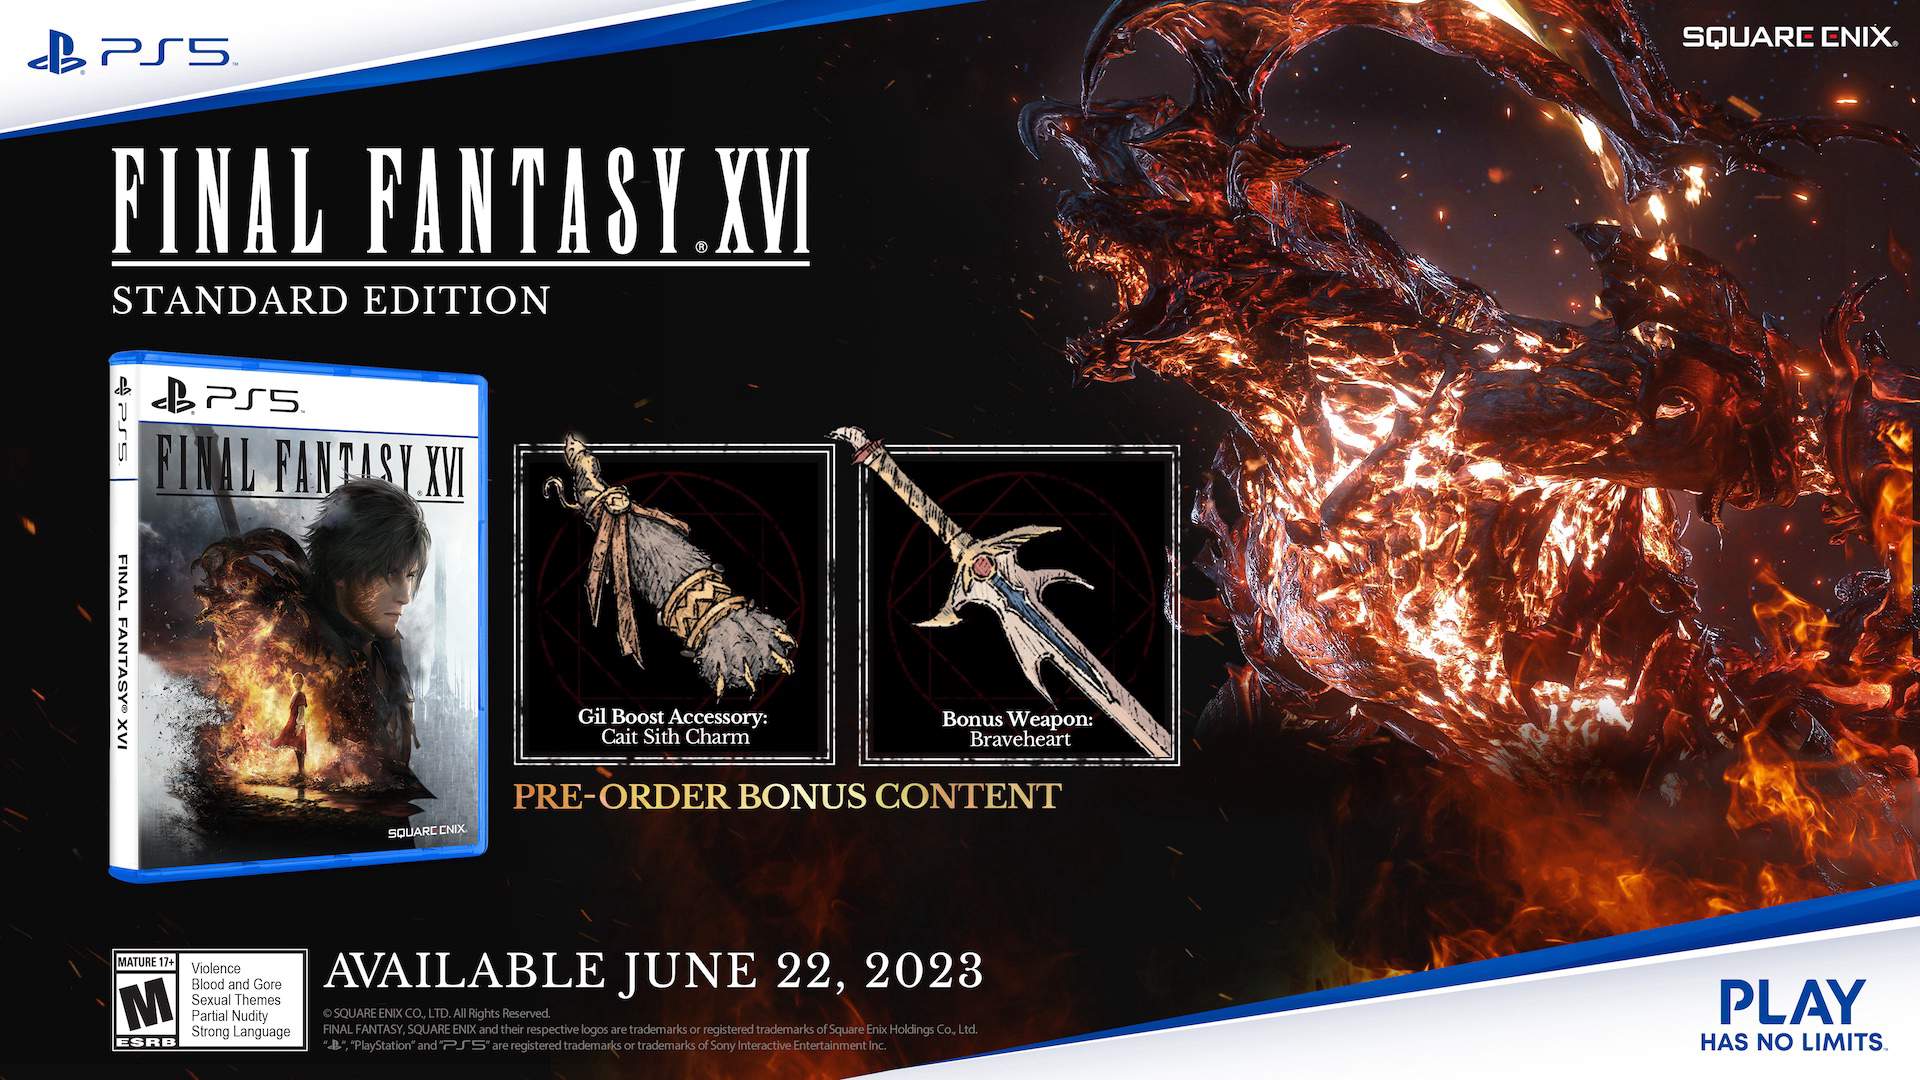 Final Fantasy 7 Rebirth Pre-Order Bonuses and Different Editions Detailed